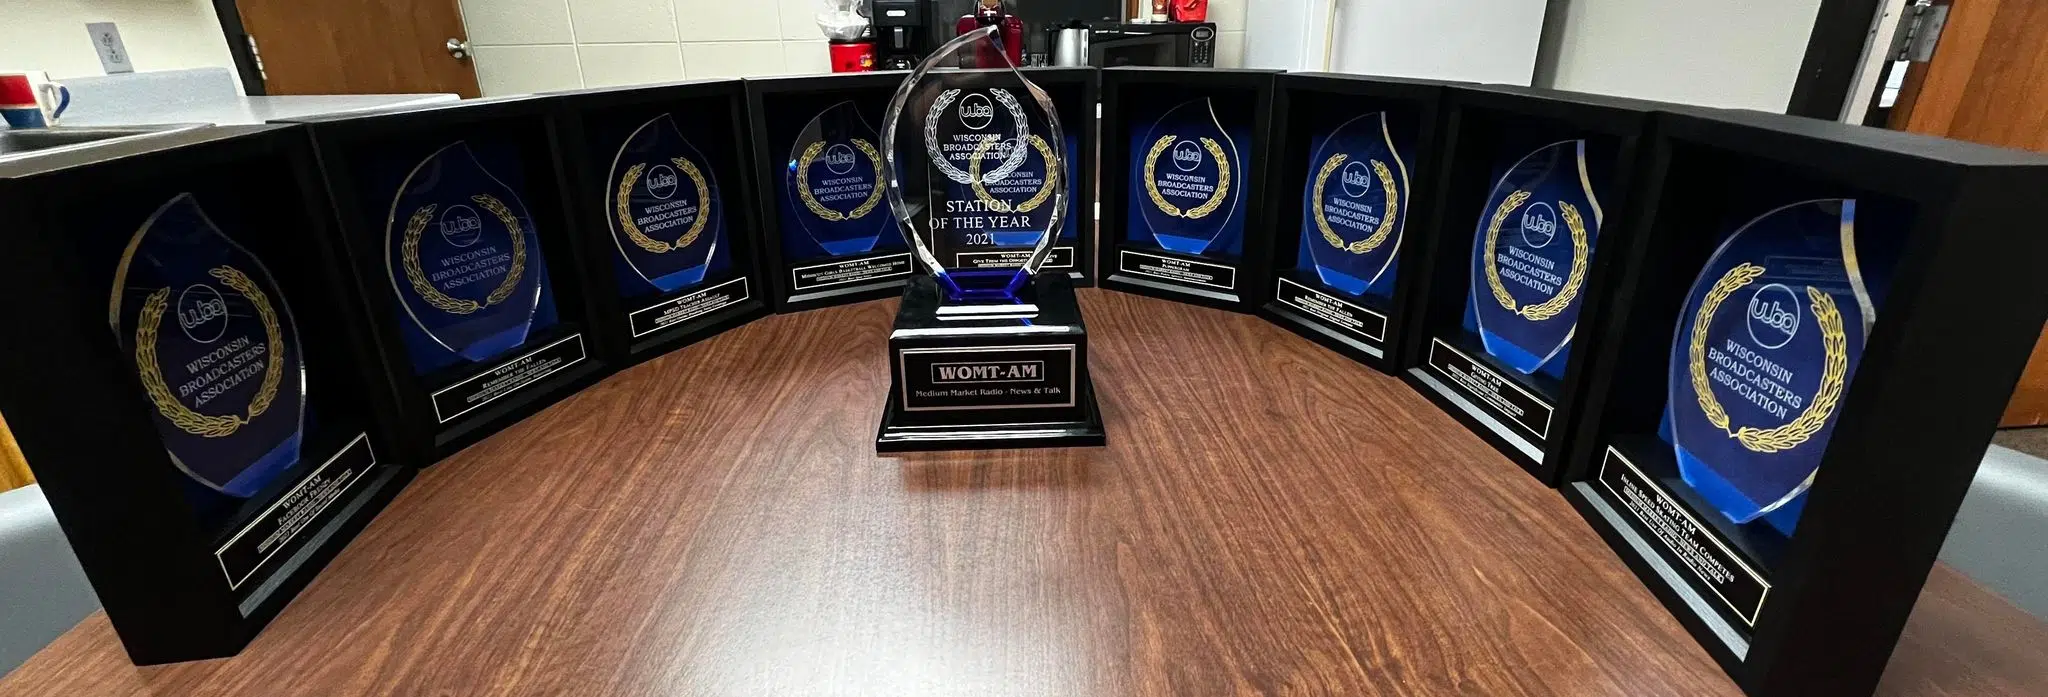 WOMT Radio Named WBA Station of the Year for the 3rd Consecutive Year